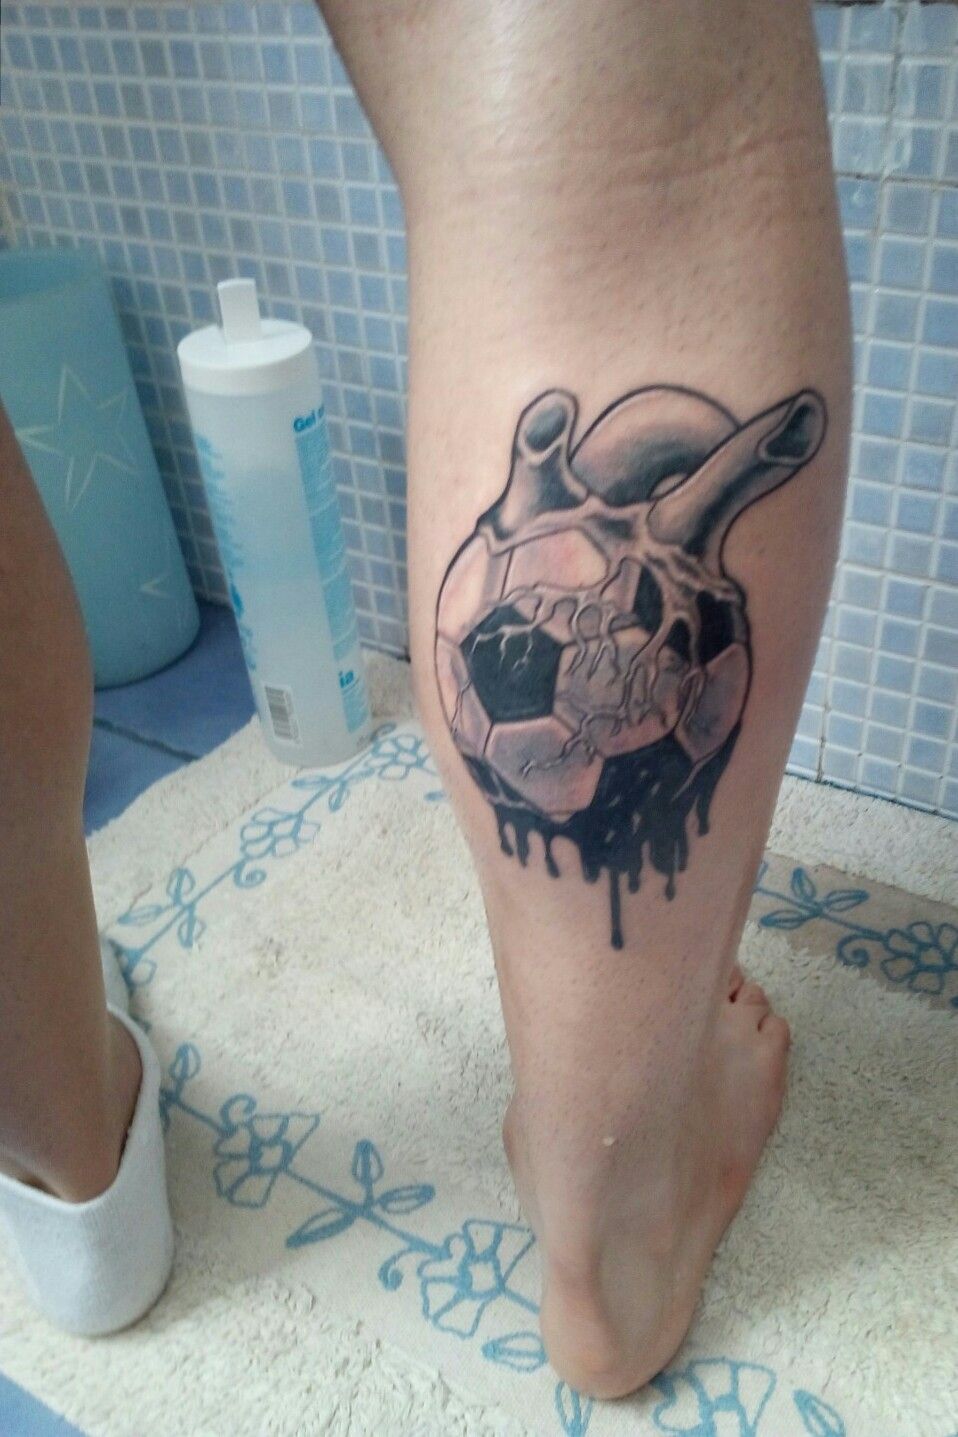 15 Best Football Tattoo Designs for Sports Lovers